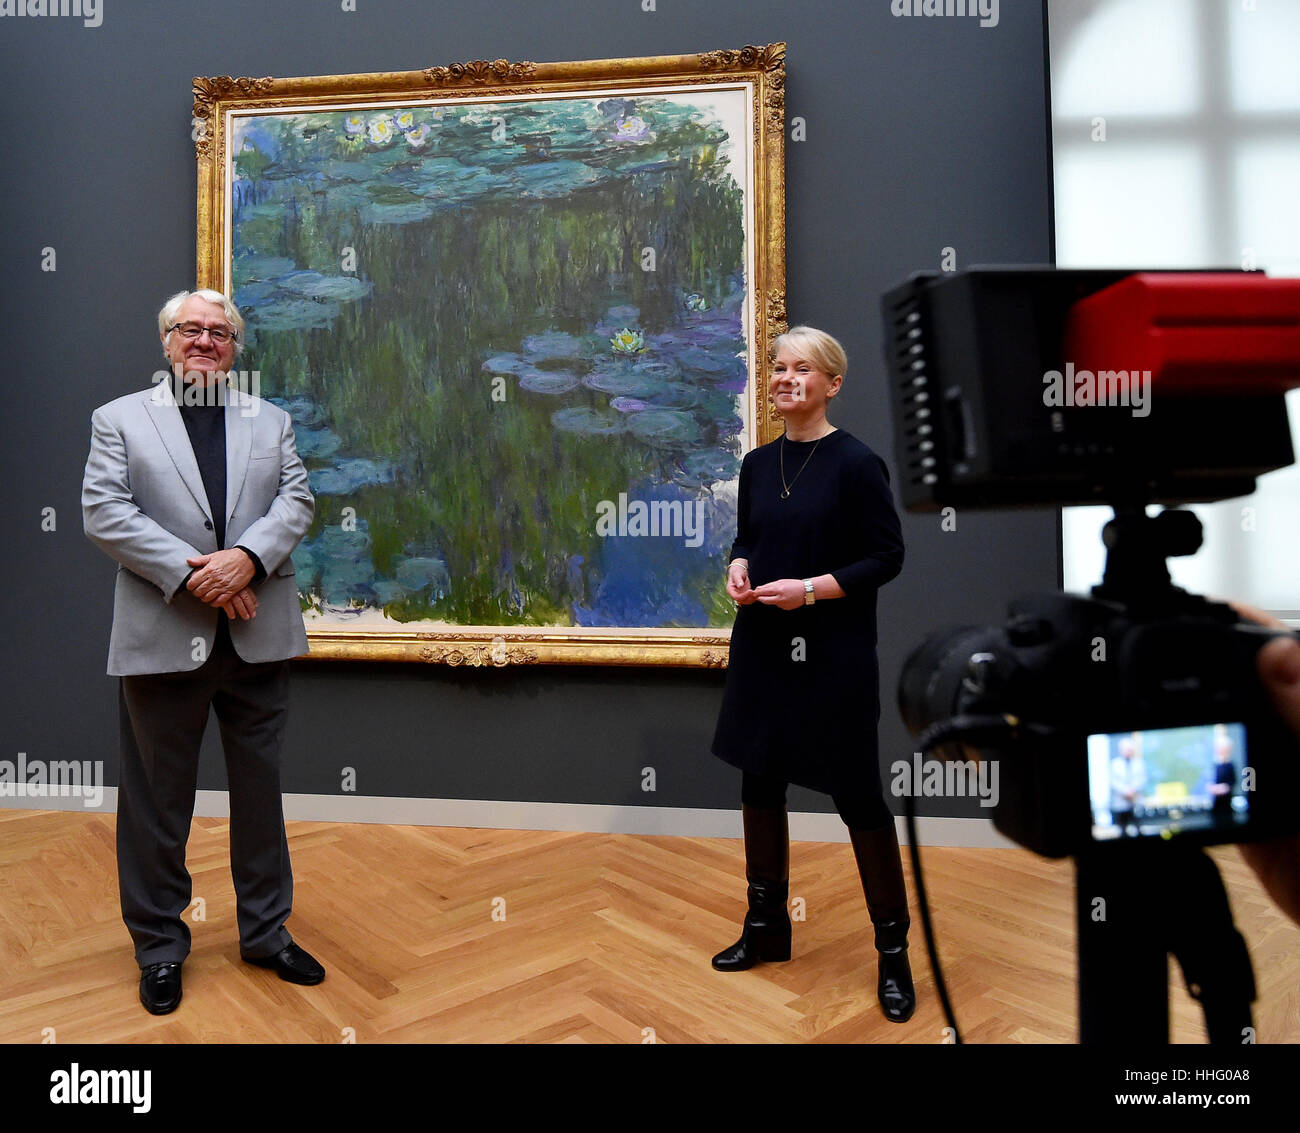 Art patron Hasso Plattner and museum director Ortrud Westheider stand in front of the painting 'Sea Roses' by Claude Monet at the Museum Barberini in Potsdam, Germany, 19 January 2017. The msueum will open on Friday, 20 January 2017, with the exhibition Impressionismus. Photo: Bernd Settnik/dpa-Zentralbild/dpa Stock Photo